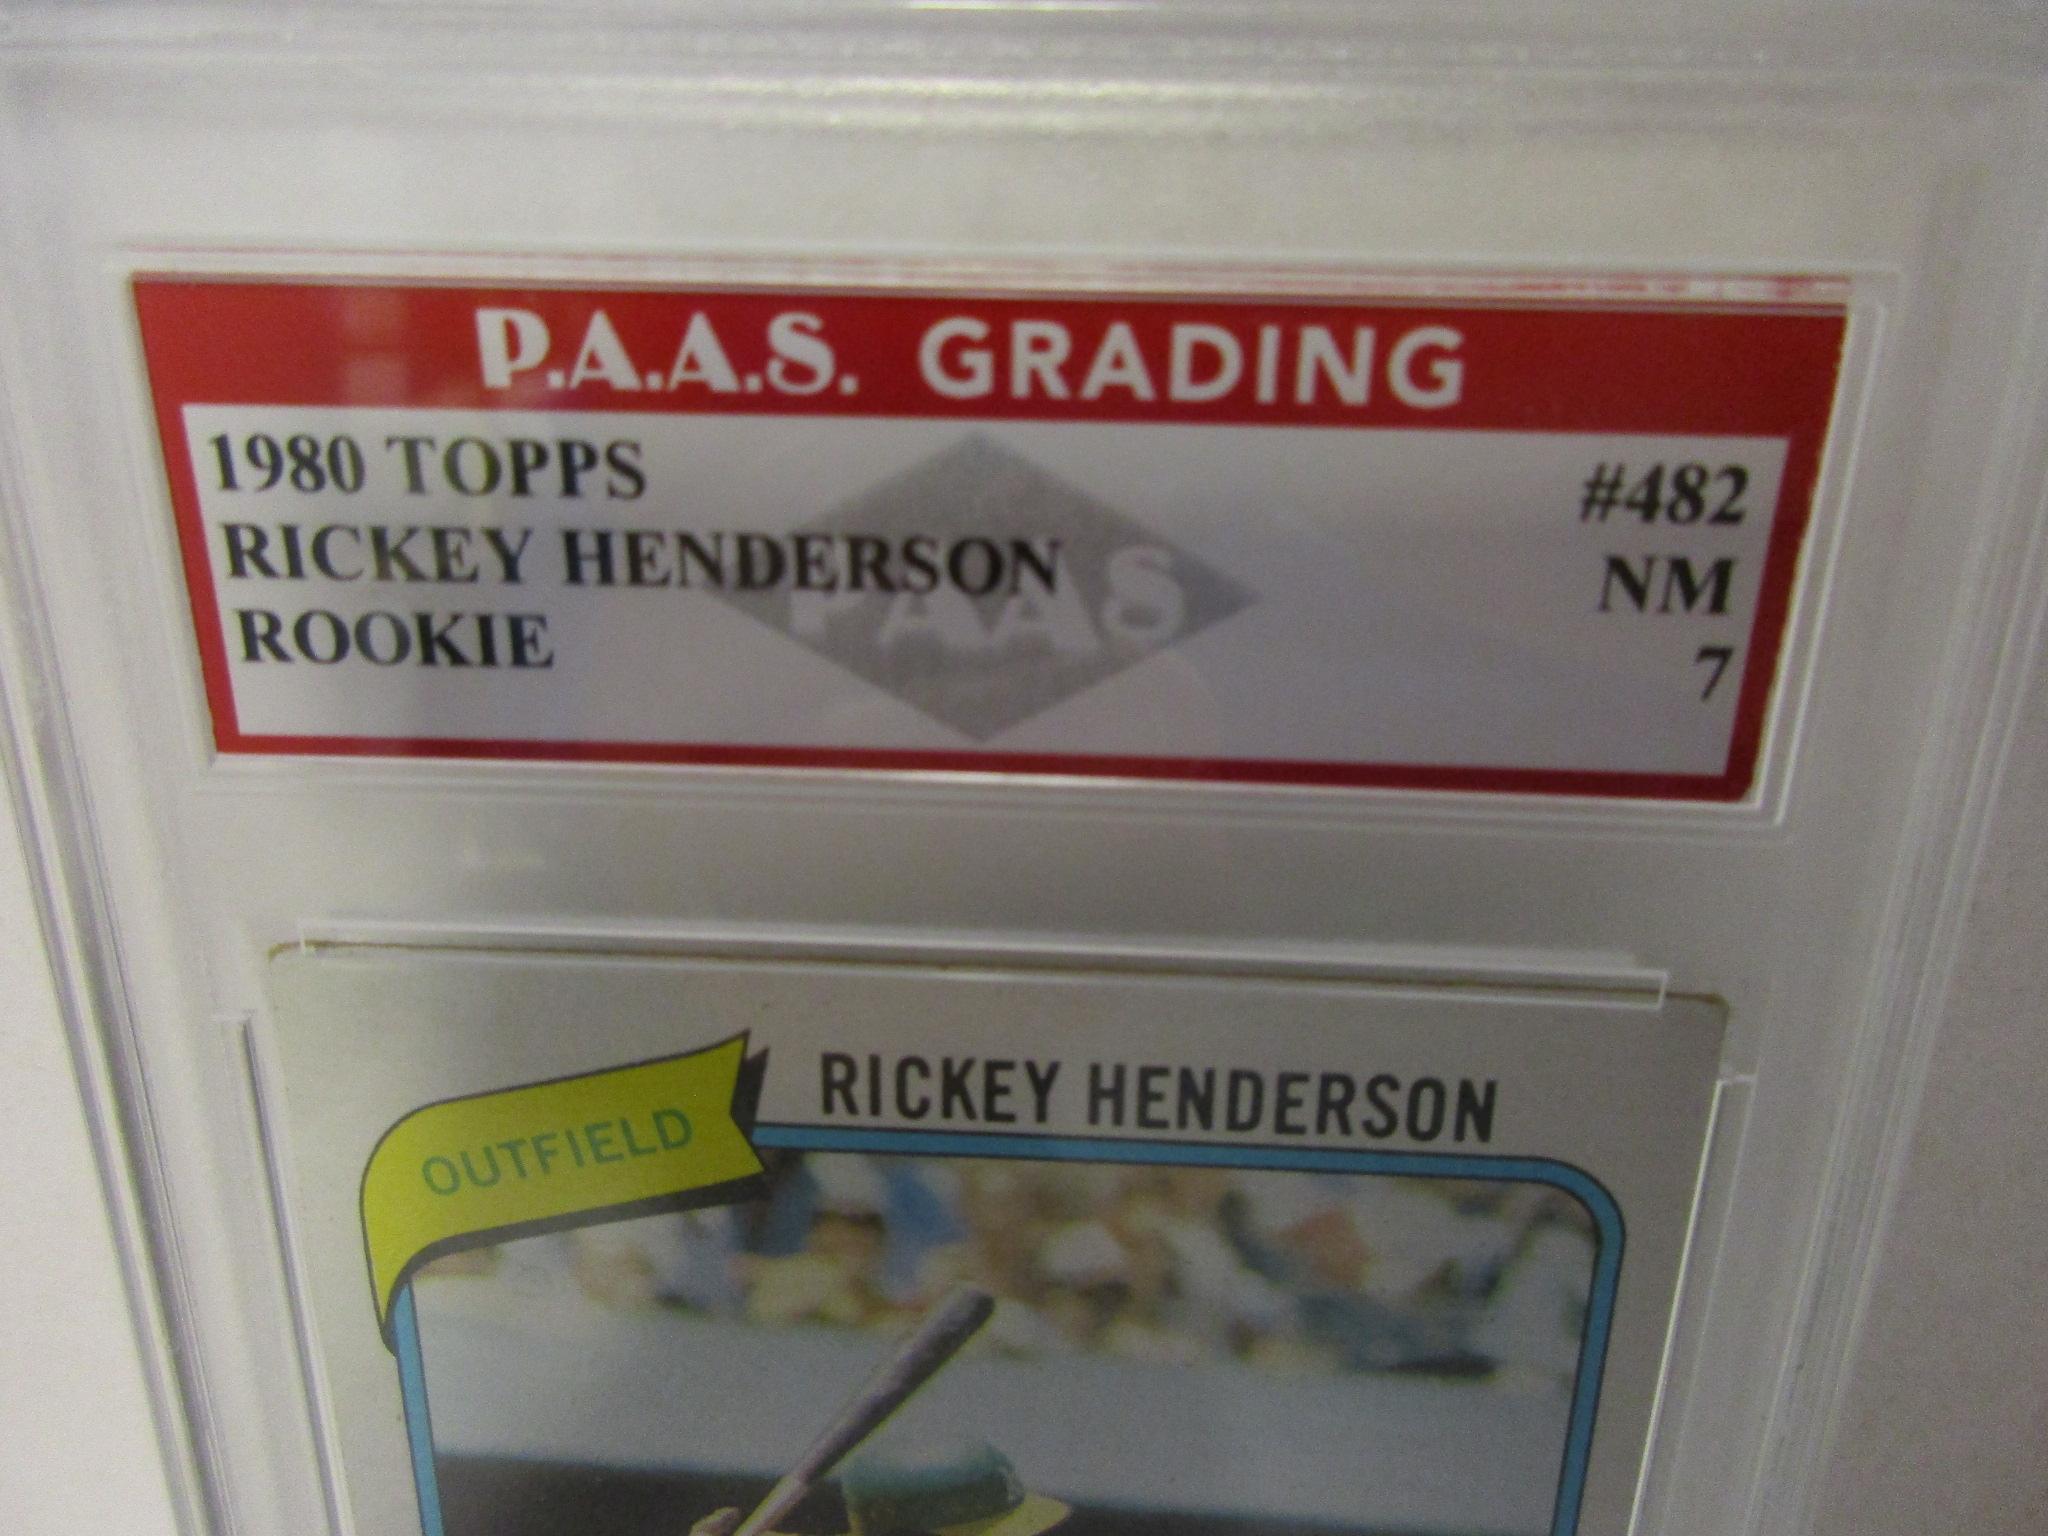 Rickey Henderson Oakland A's 1980 Topps ROOKIE #482 graded PAAS NM 7